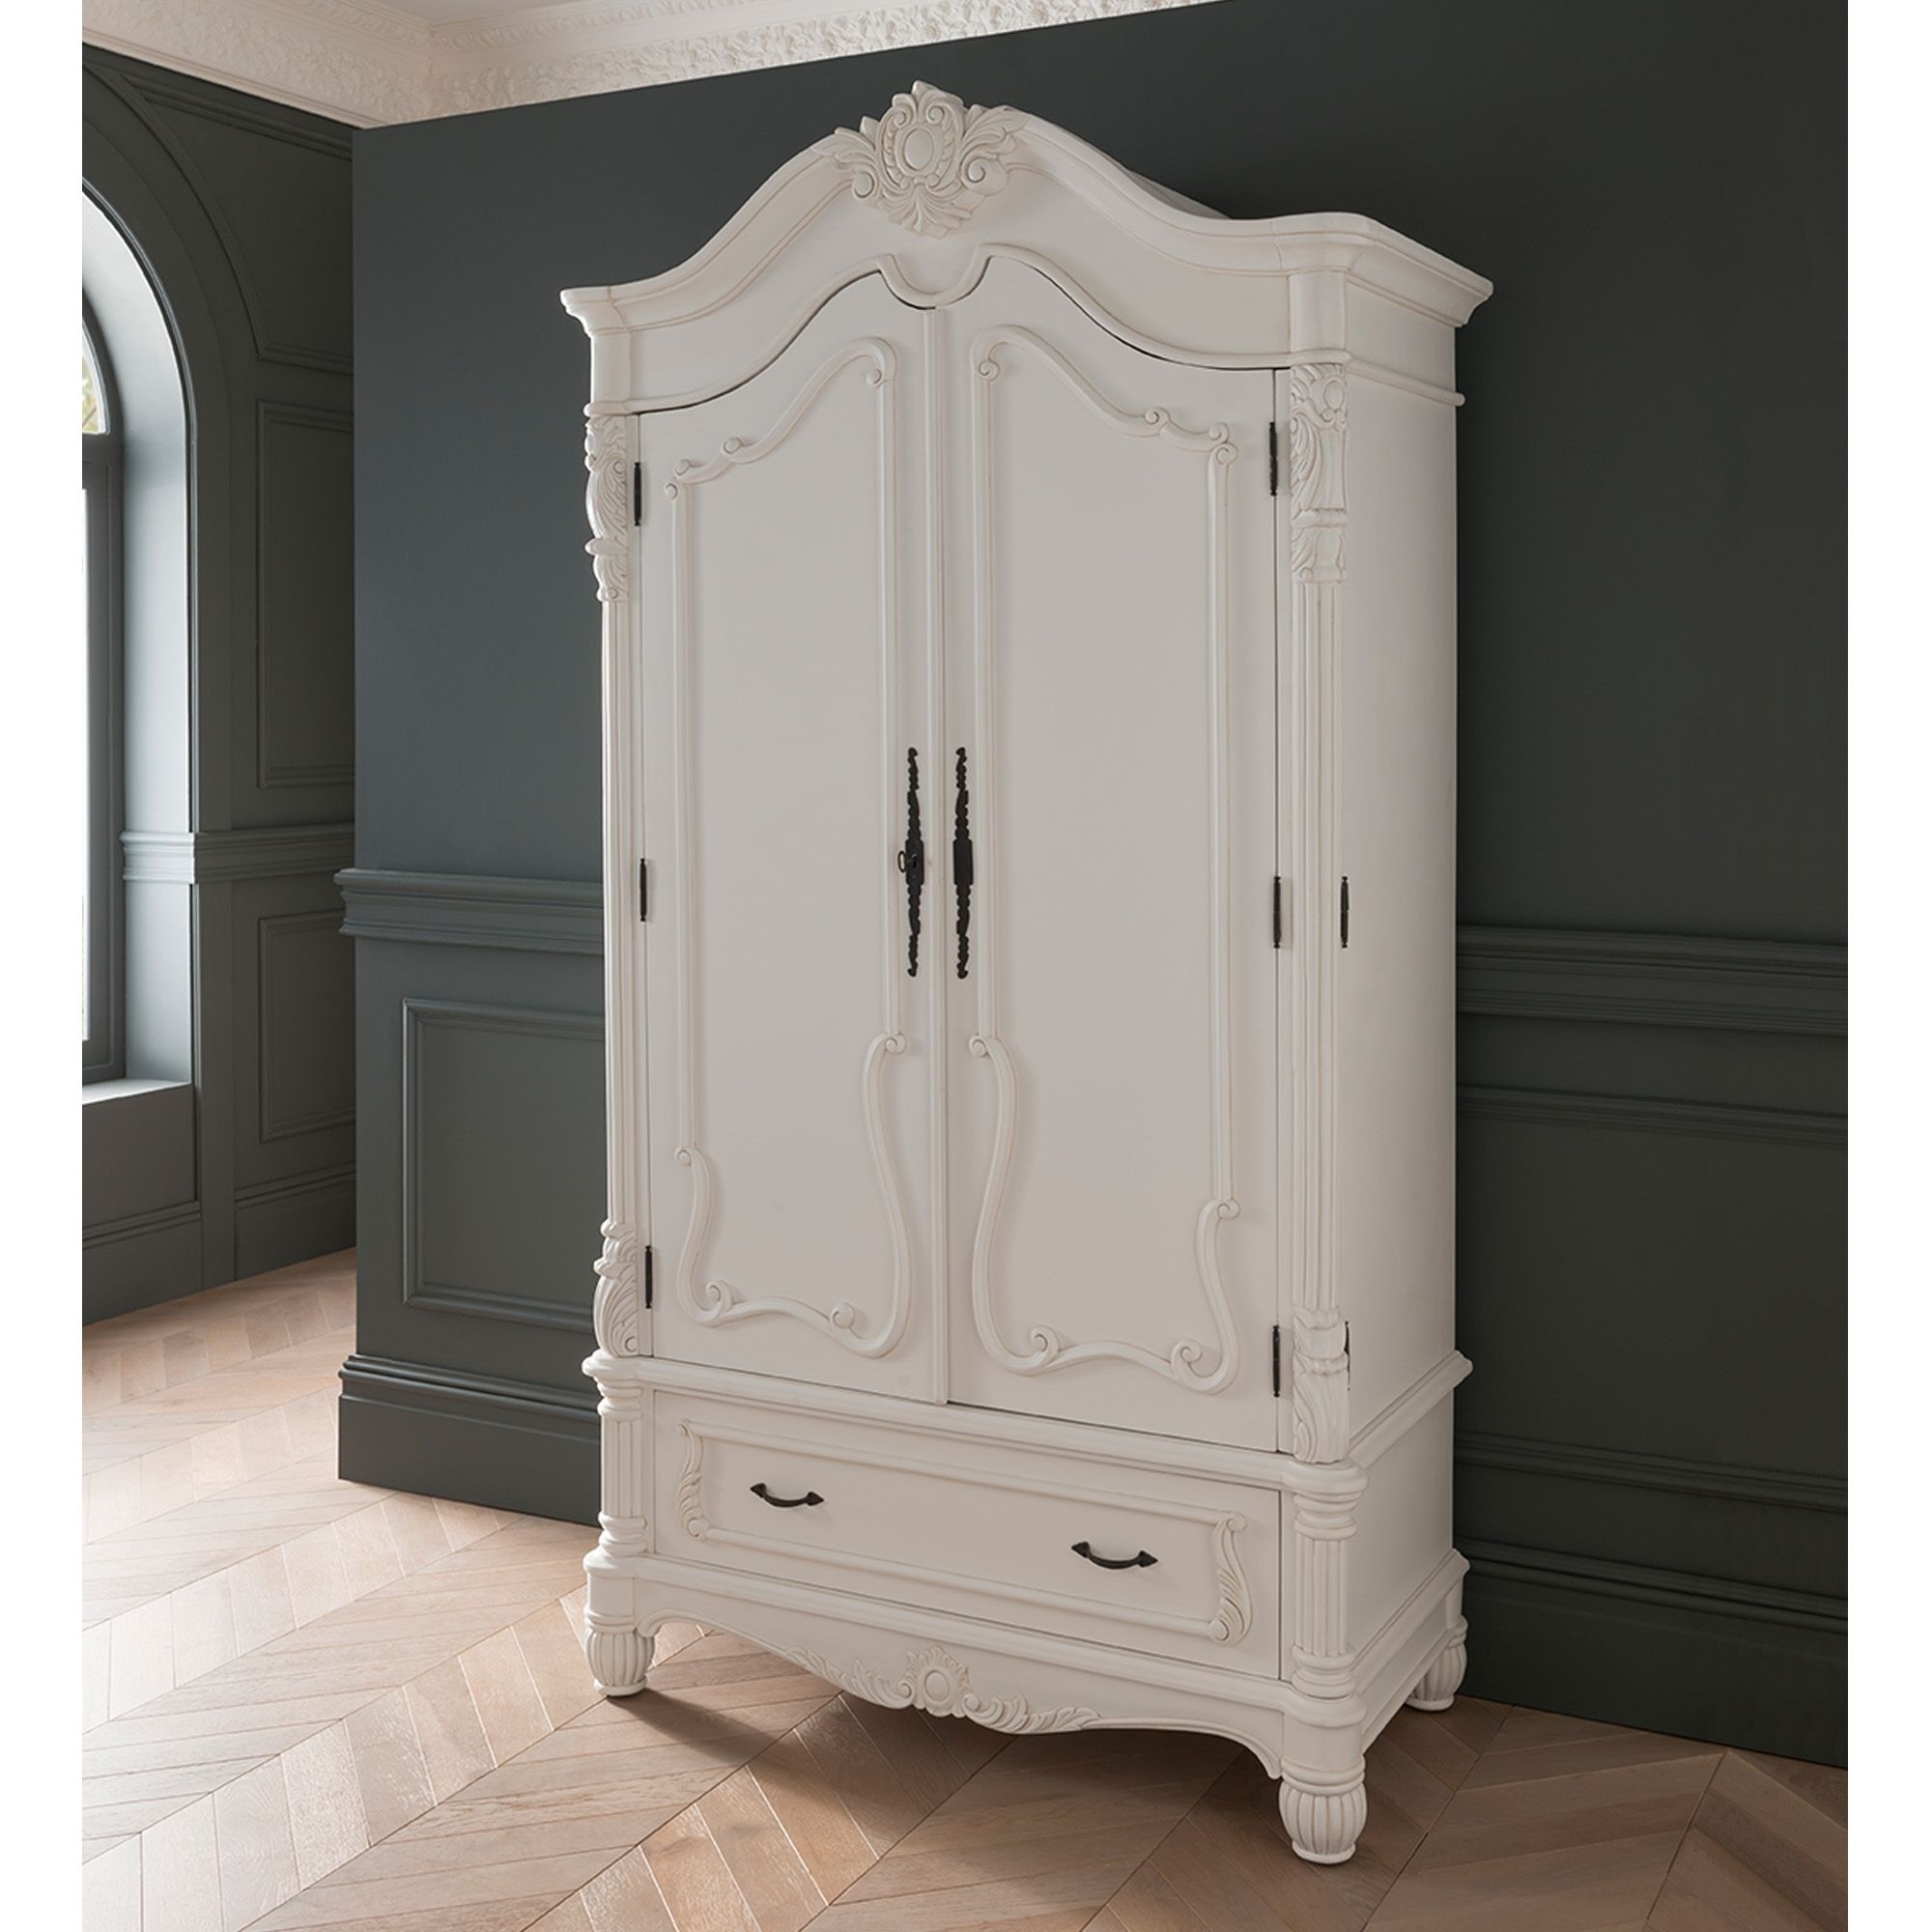 Antique French Style White Finished 1 Drawer Wardrobe | Homesdirect365 Inside Antique French Wardrobes (View 6 of 15)